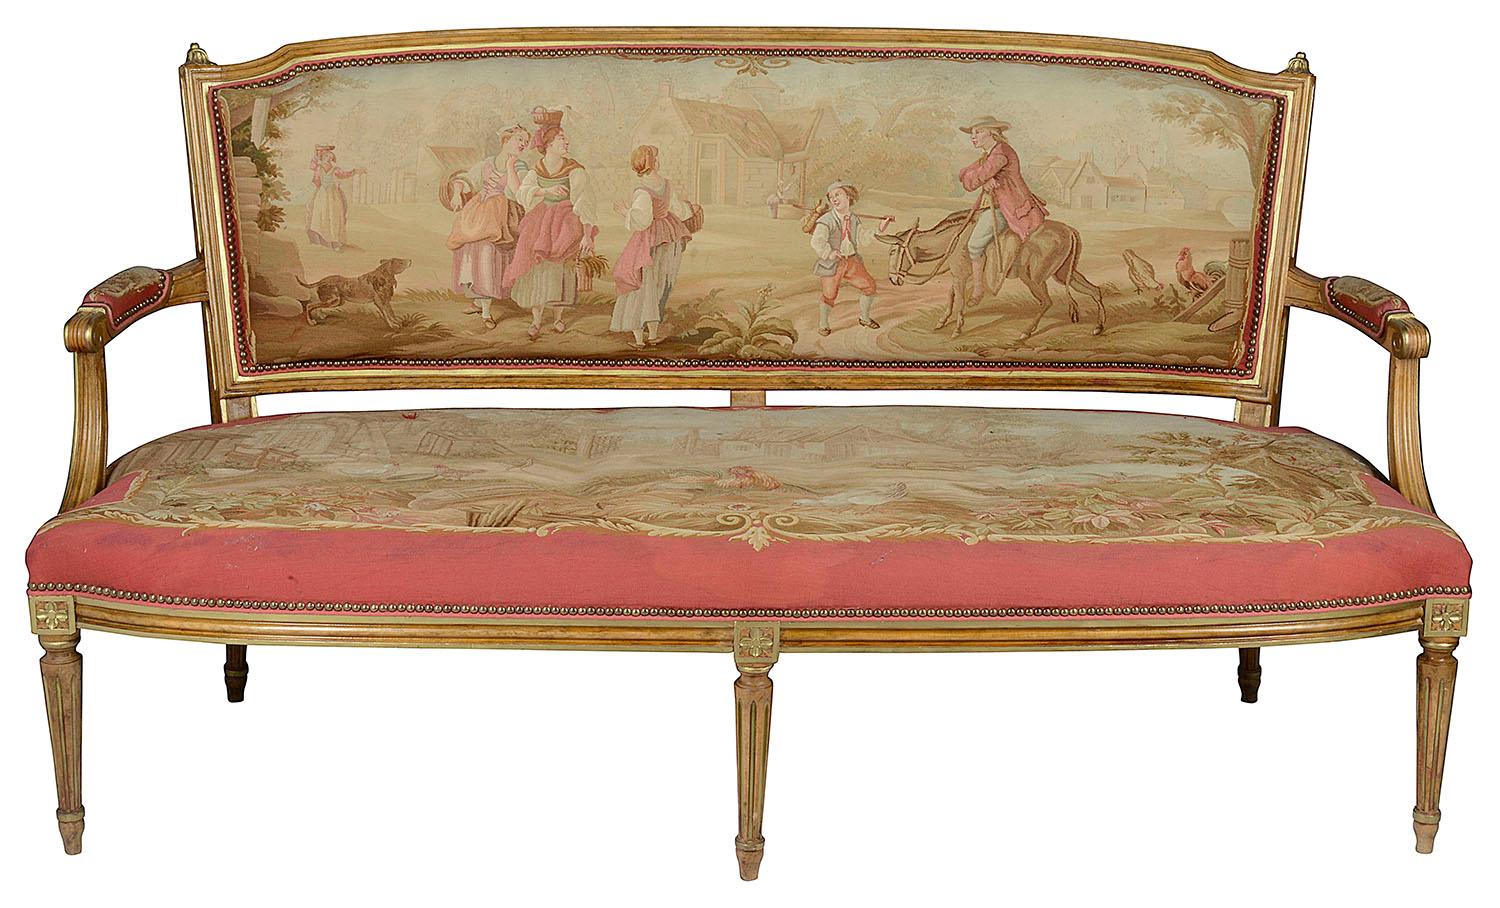 A good quality late 19th century French Louis XVI style salon suite, comprising of a sofa, a pair of arm chairs and four side chairs. Each having this wonderfully decorative Aubusson tapestry with a rich Pink ground, the backs and seats, depicting